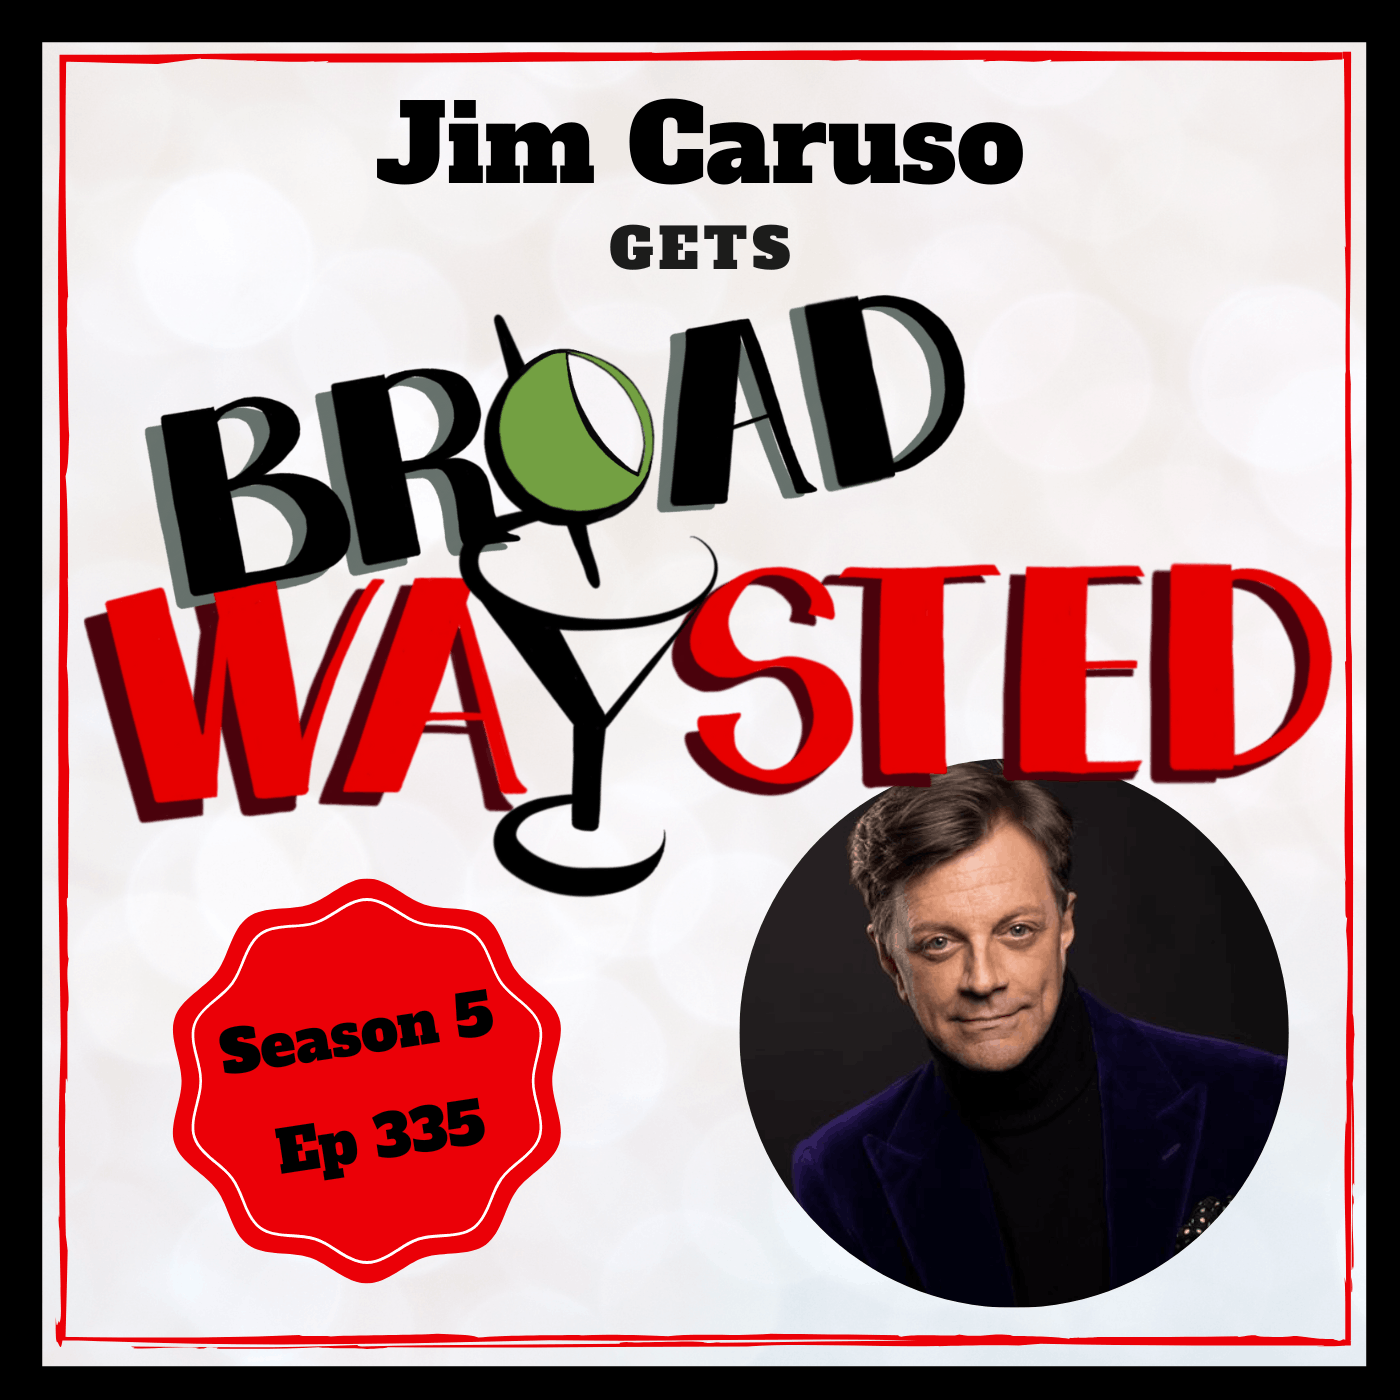 Episode 335: Jim Caruso gets Broadwaysted!